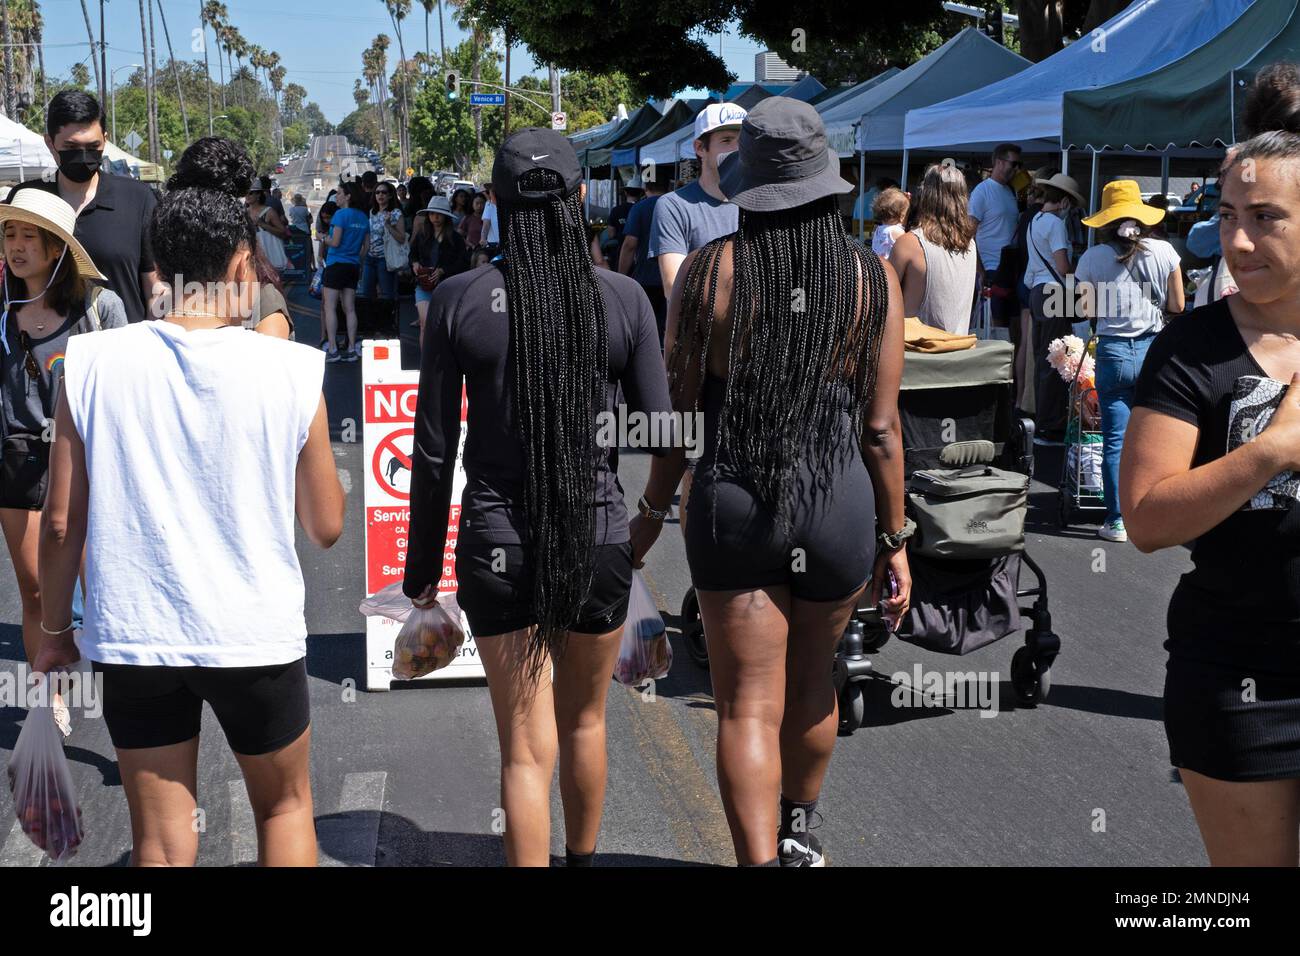 Two women sport long braids at a Farmer's Market in Los Angeles, California, USA. Stock Photo